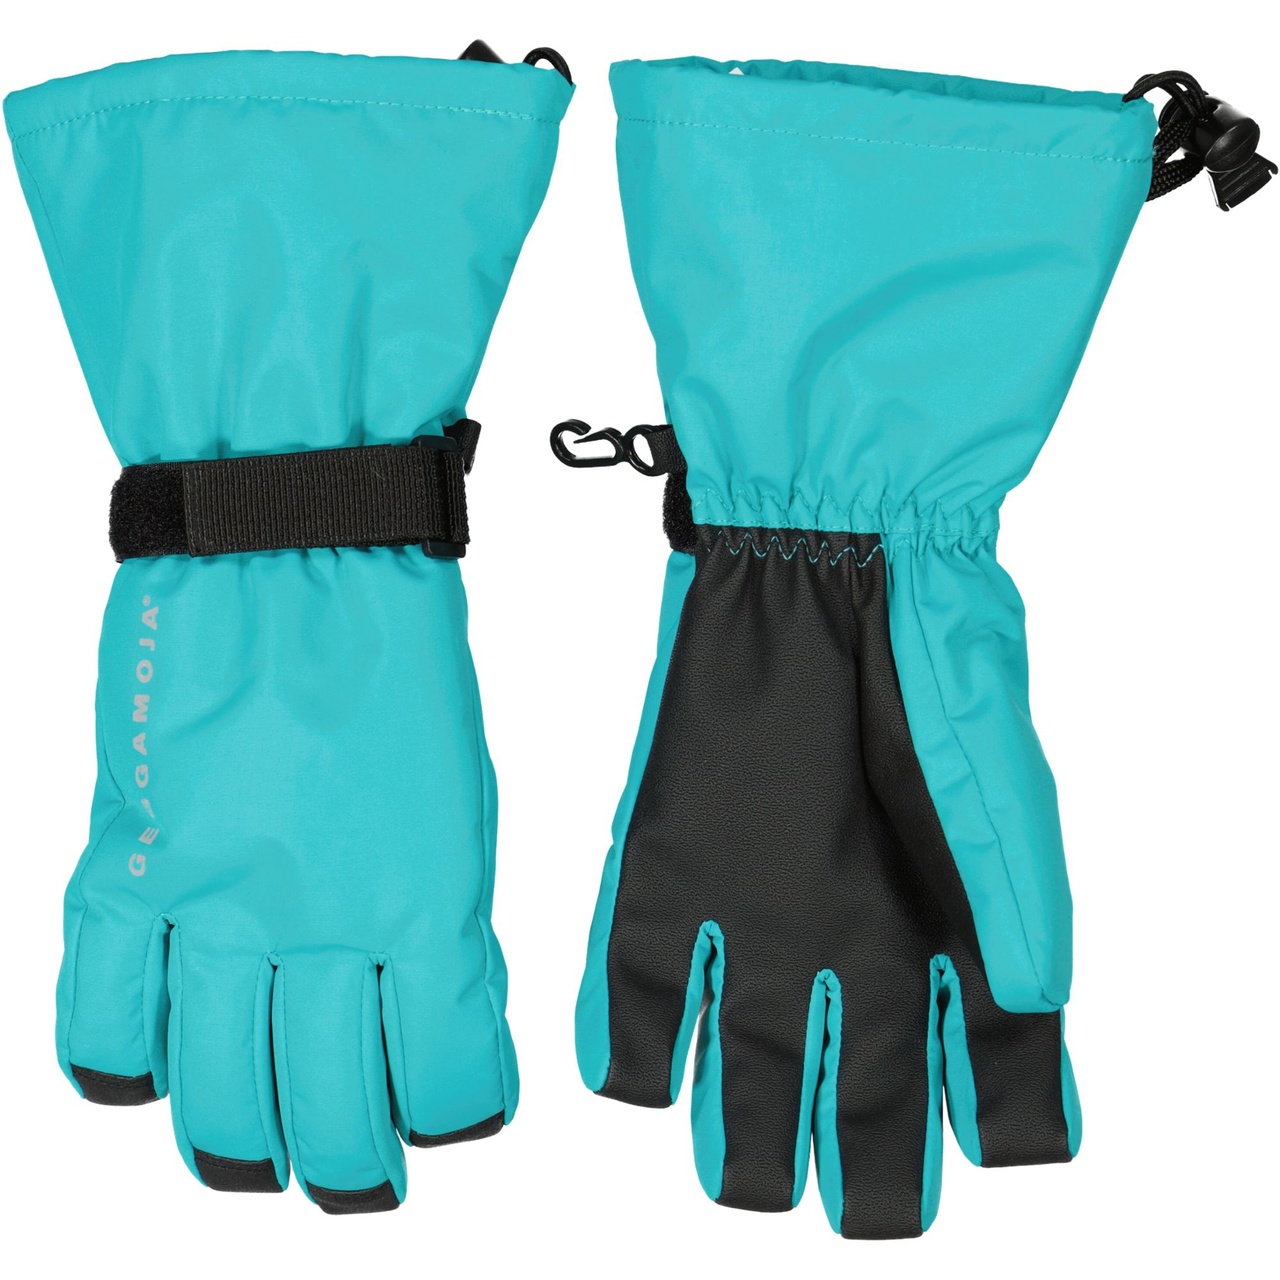 Winter gloves Turquoise  4-5 y